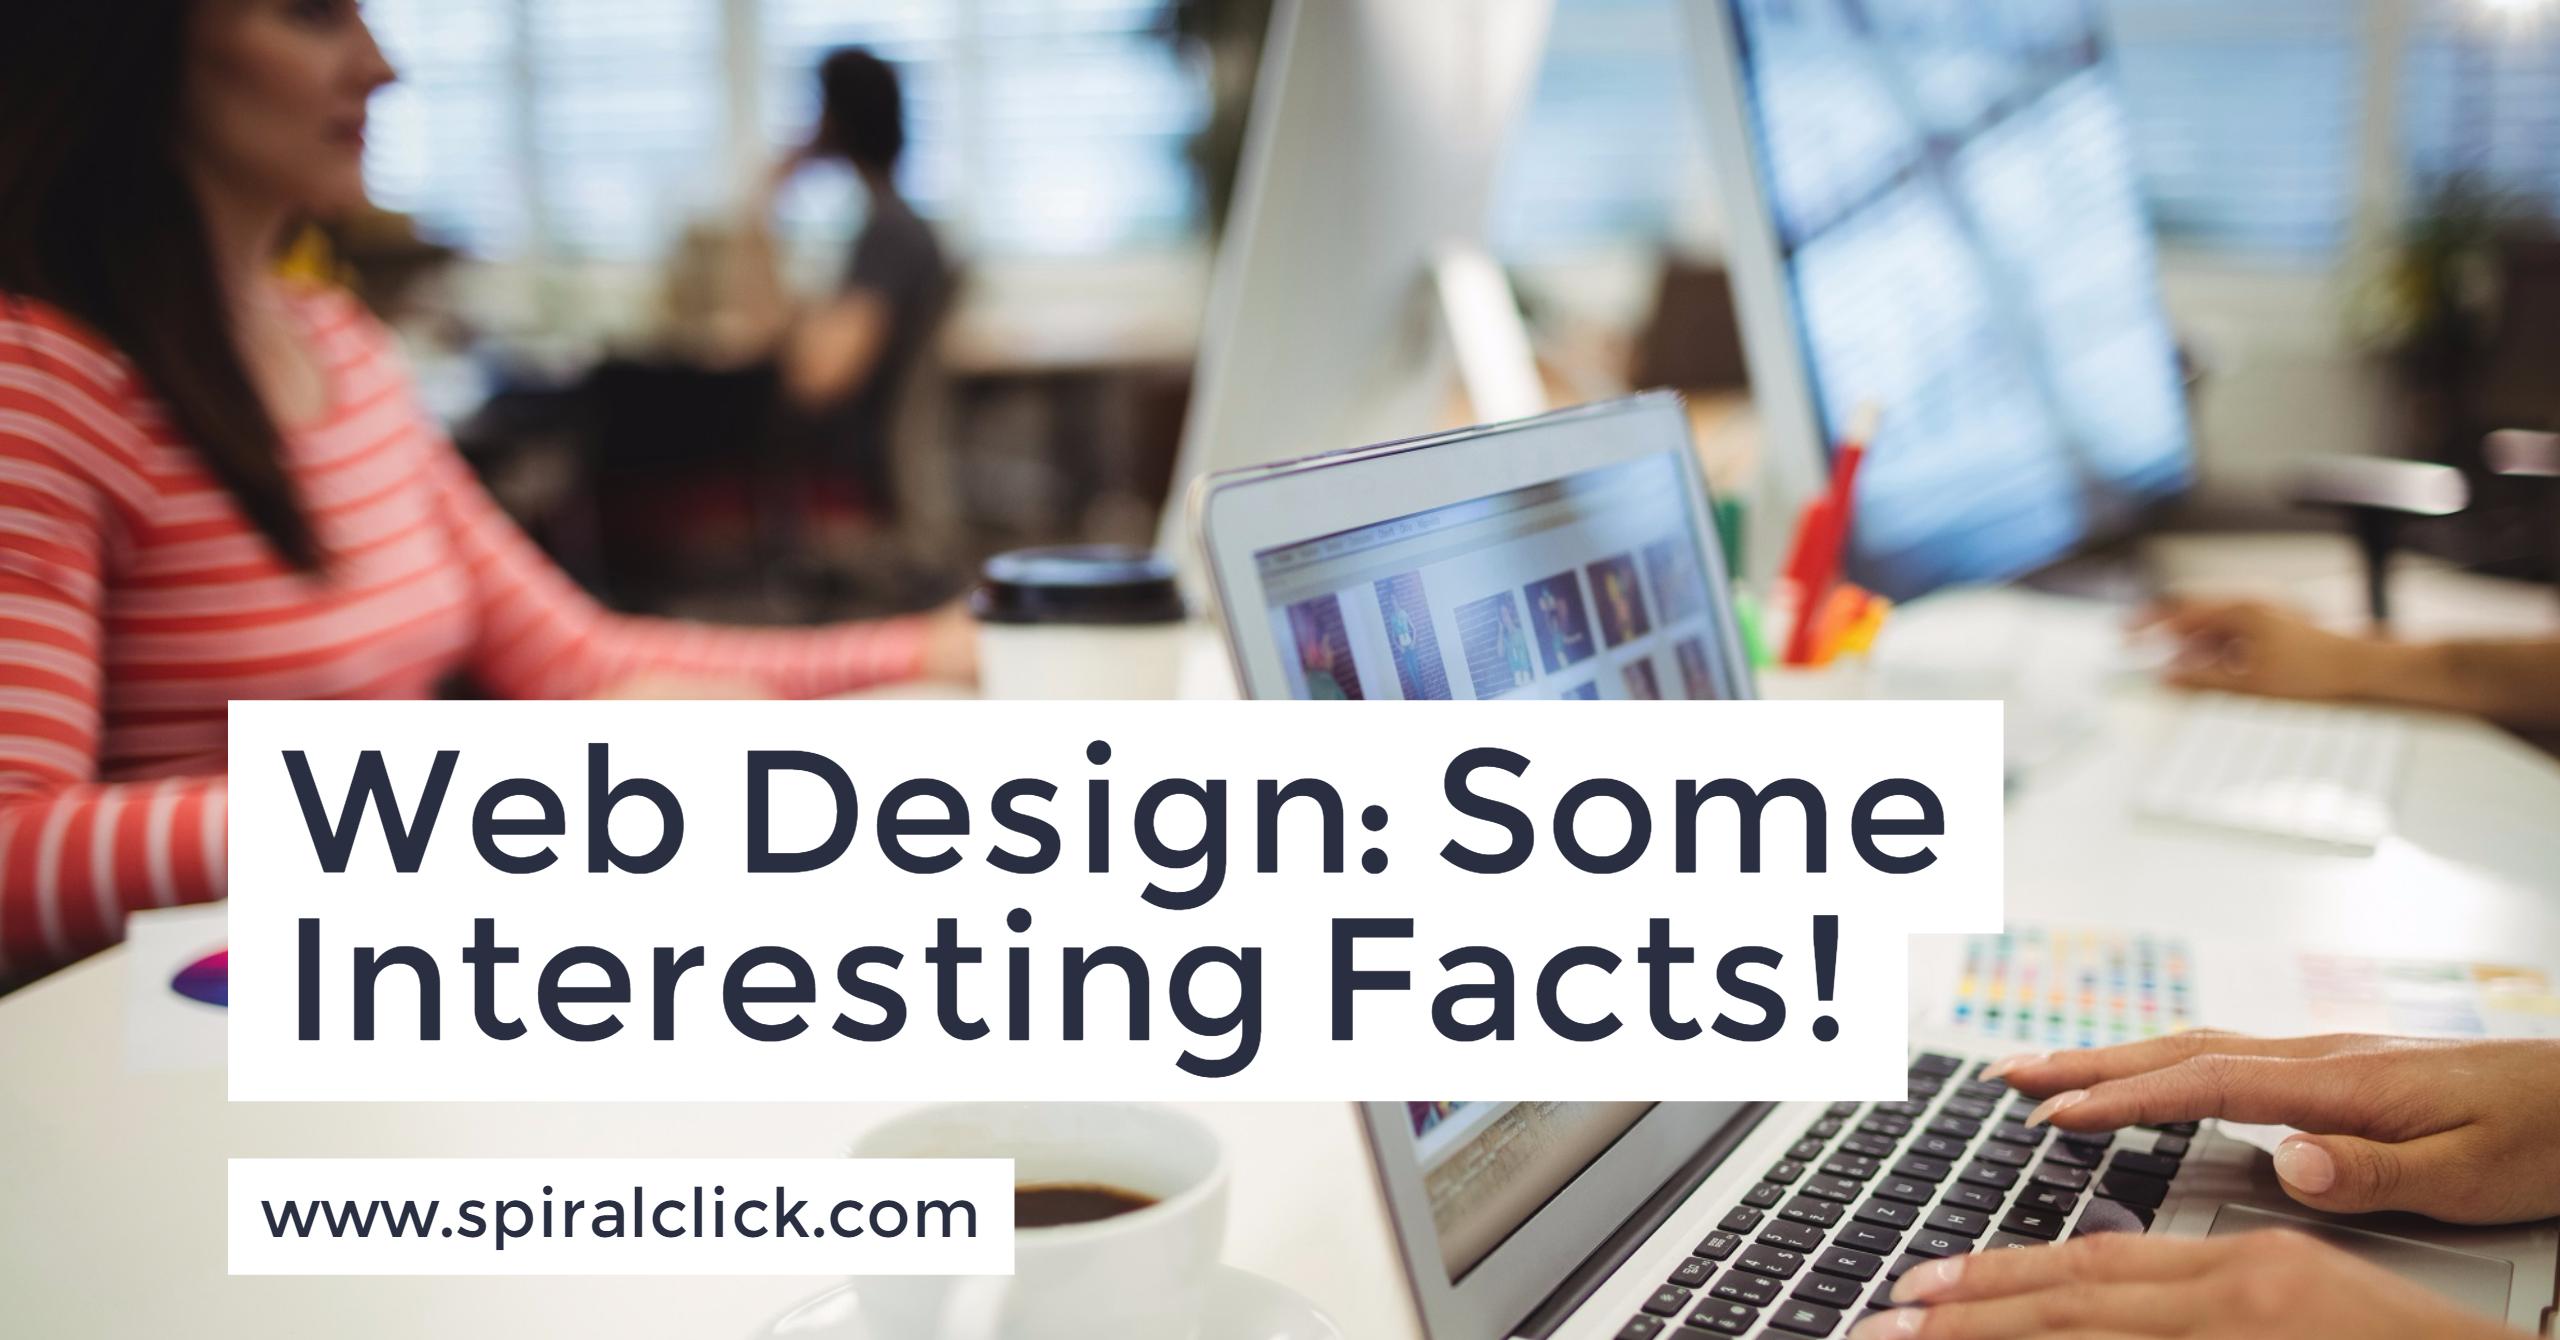 Web Design: Some Interesting Facts!